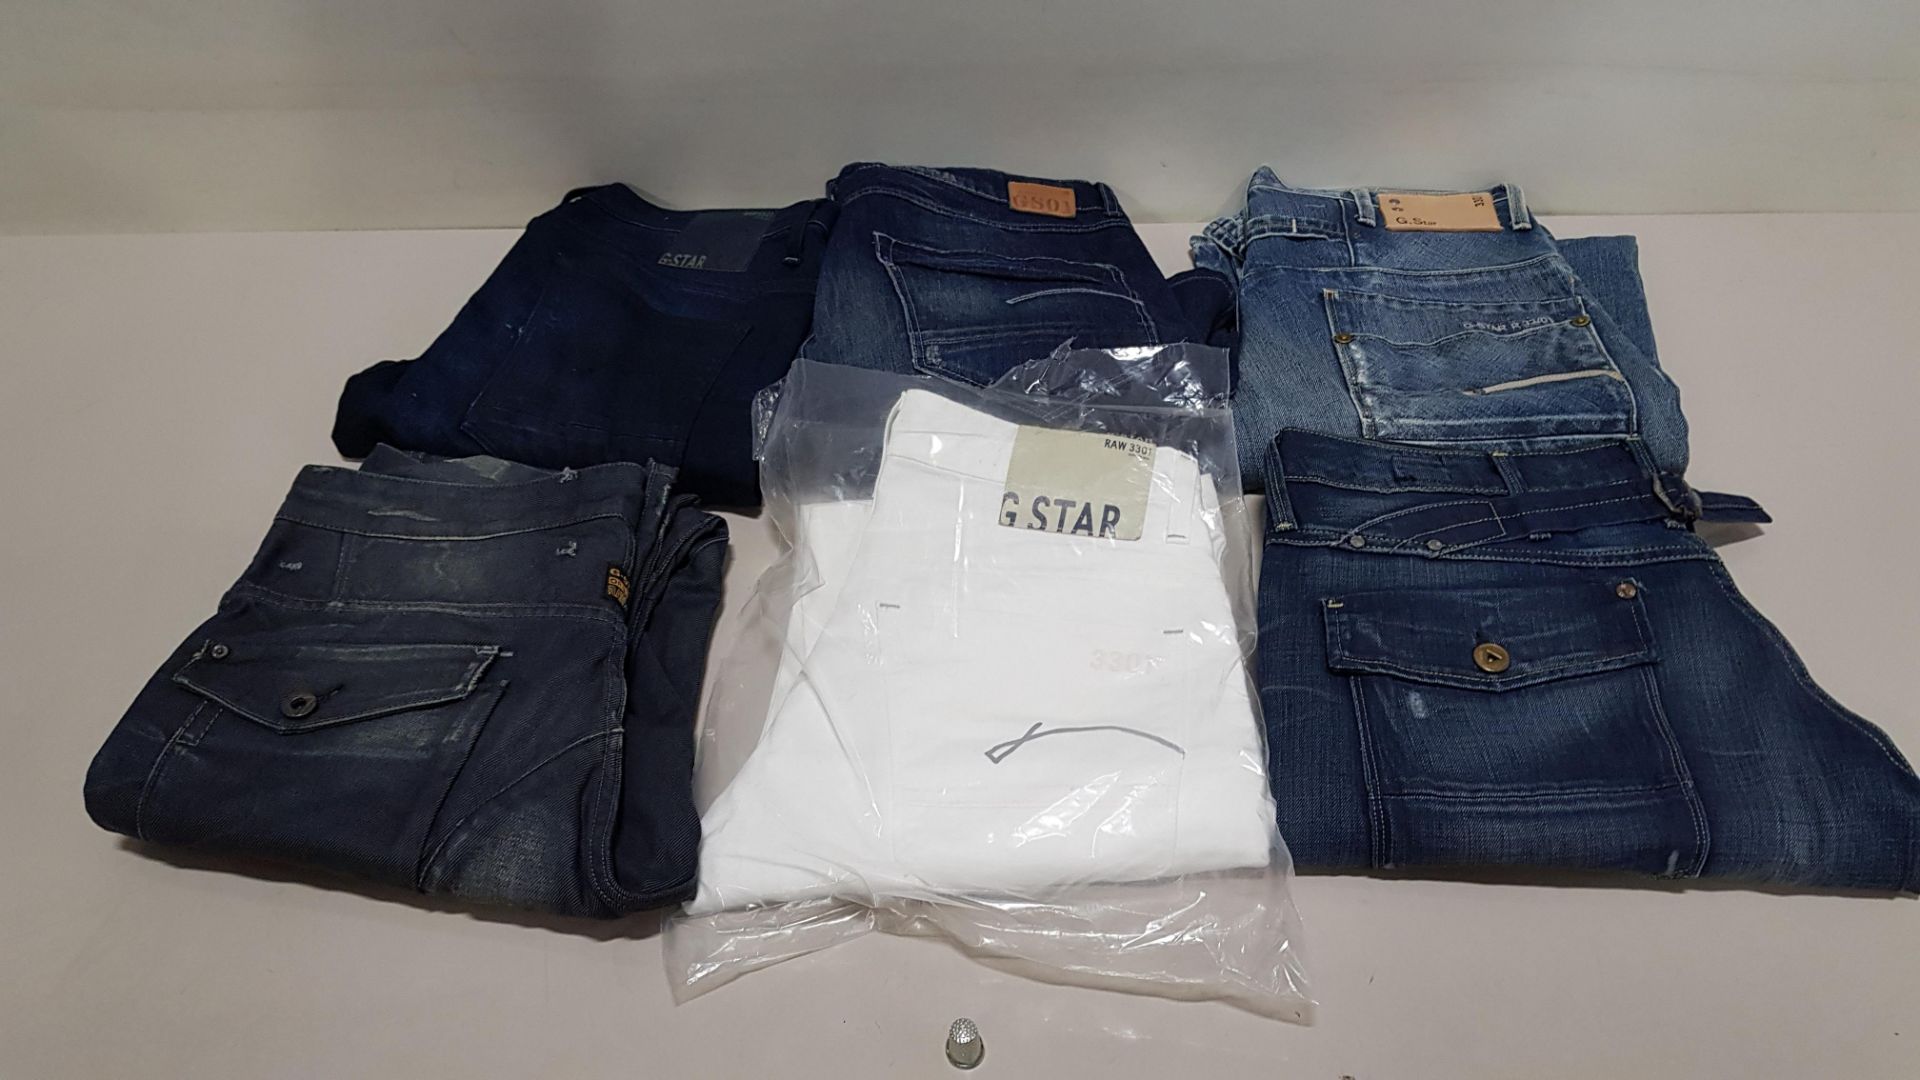 6 X PAIRS OF BRAND NEW G-STAR RAW JEANS IN VARIOUS STYLES & COLOURS IE. LIGHT BLUE, DARK BLUE, GREY,